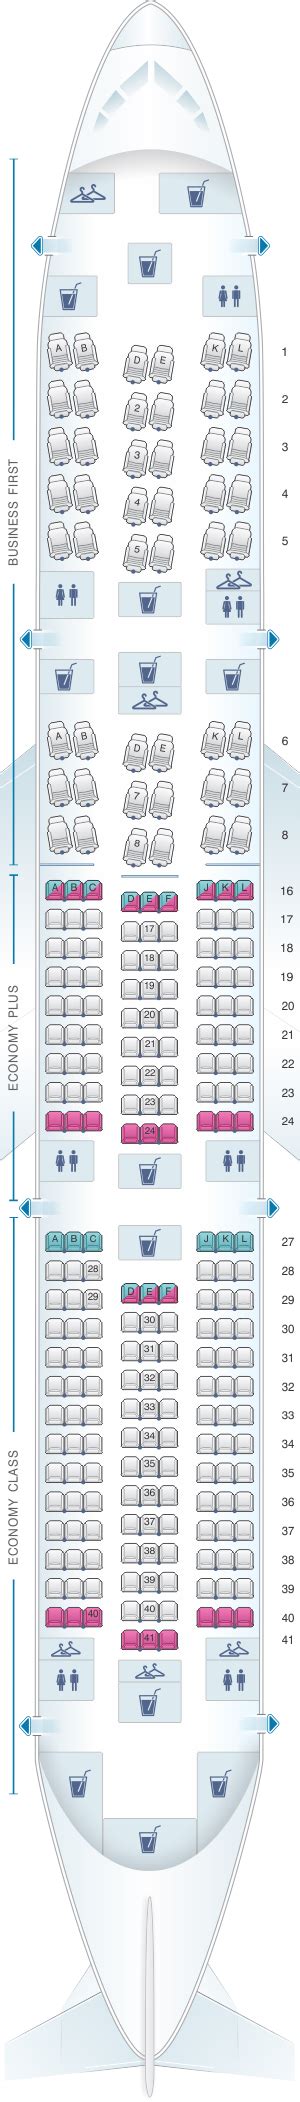 Seat Map United Airlines Boeing B787 9 Dreamliner